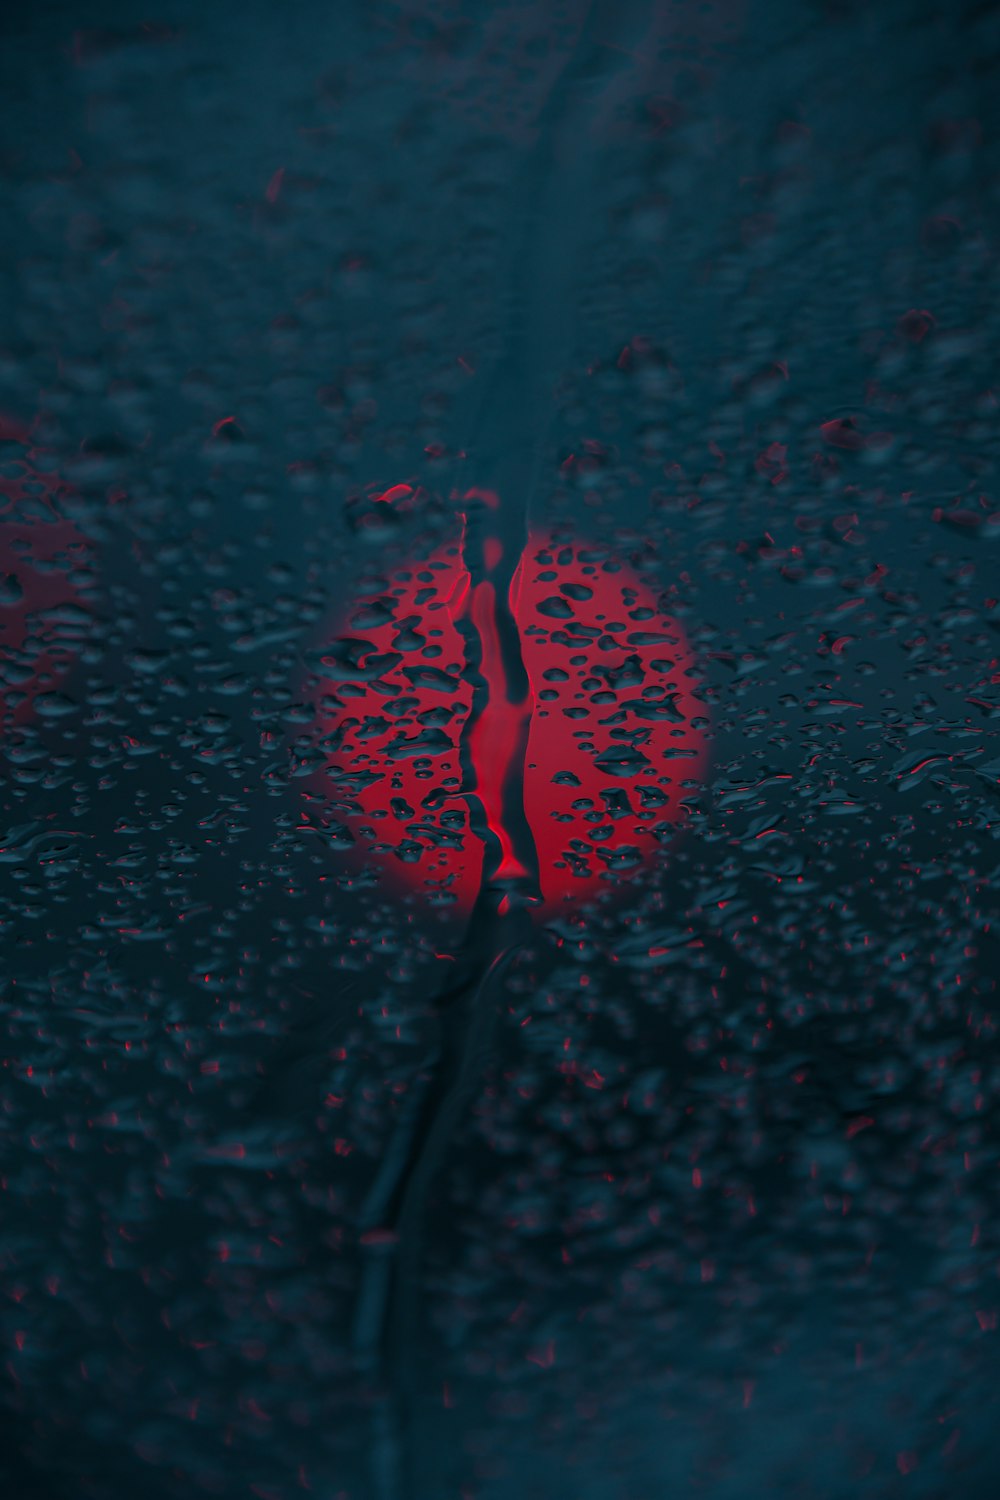 a close up of a red object on a wet surface